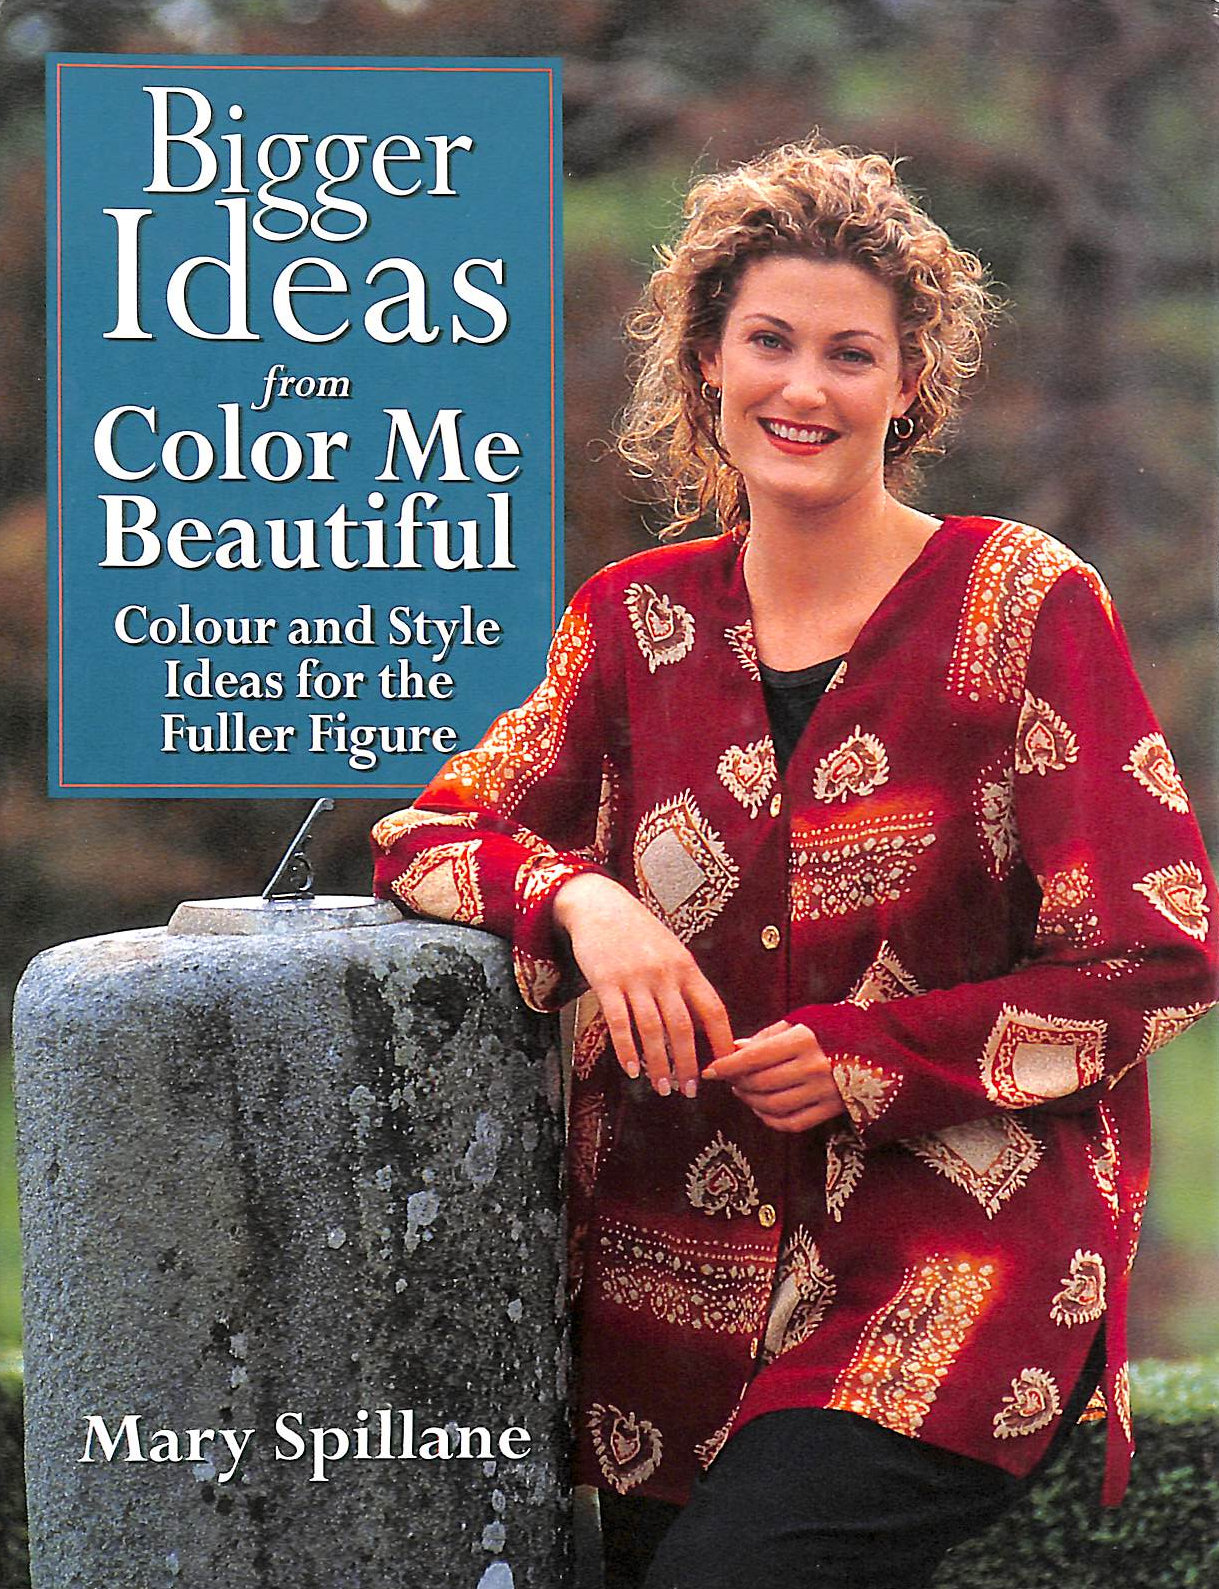 SPILLANE, MARY - Bigger Ideas from 'Color Me Beautiful': Colour and Style Advice for the Fuller Figure